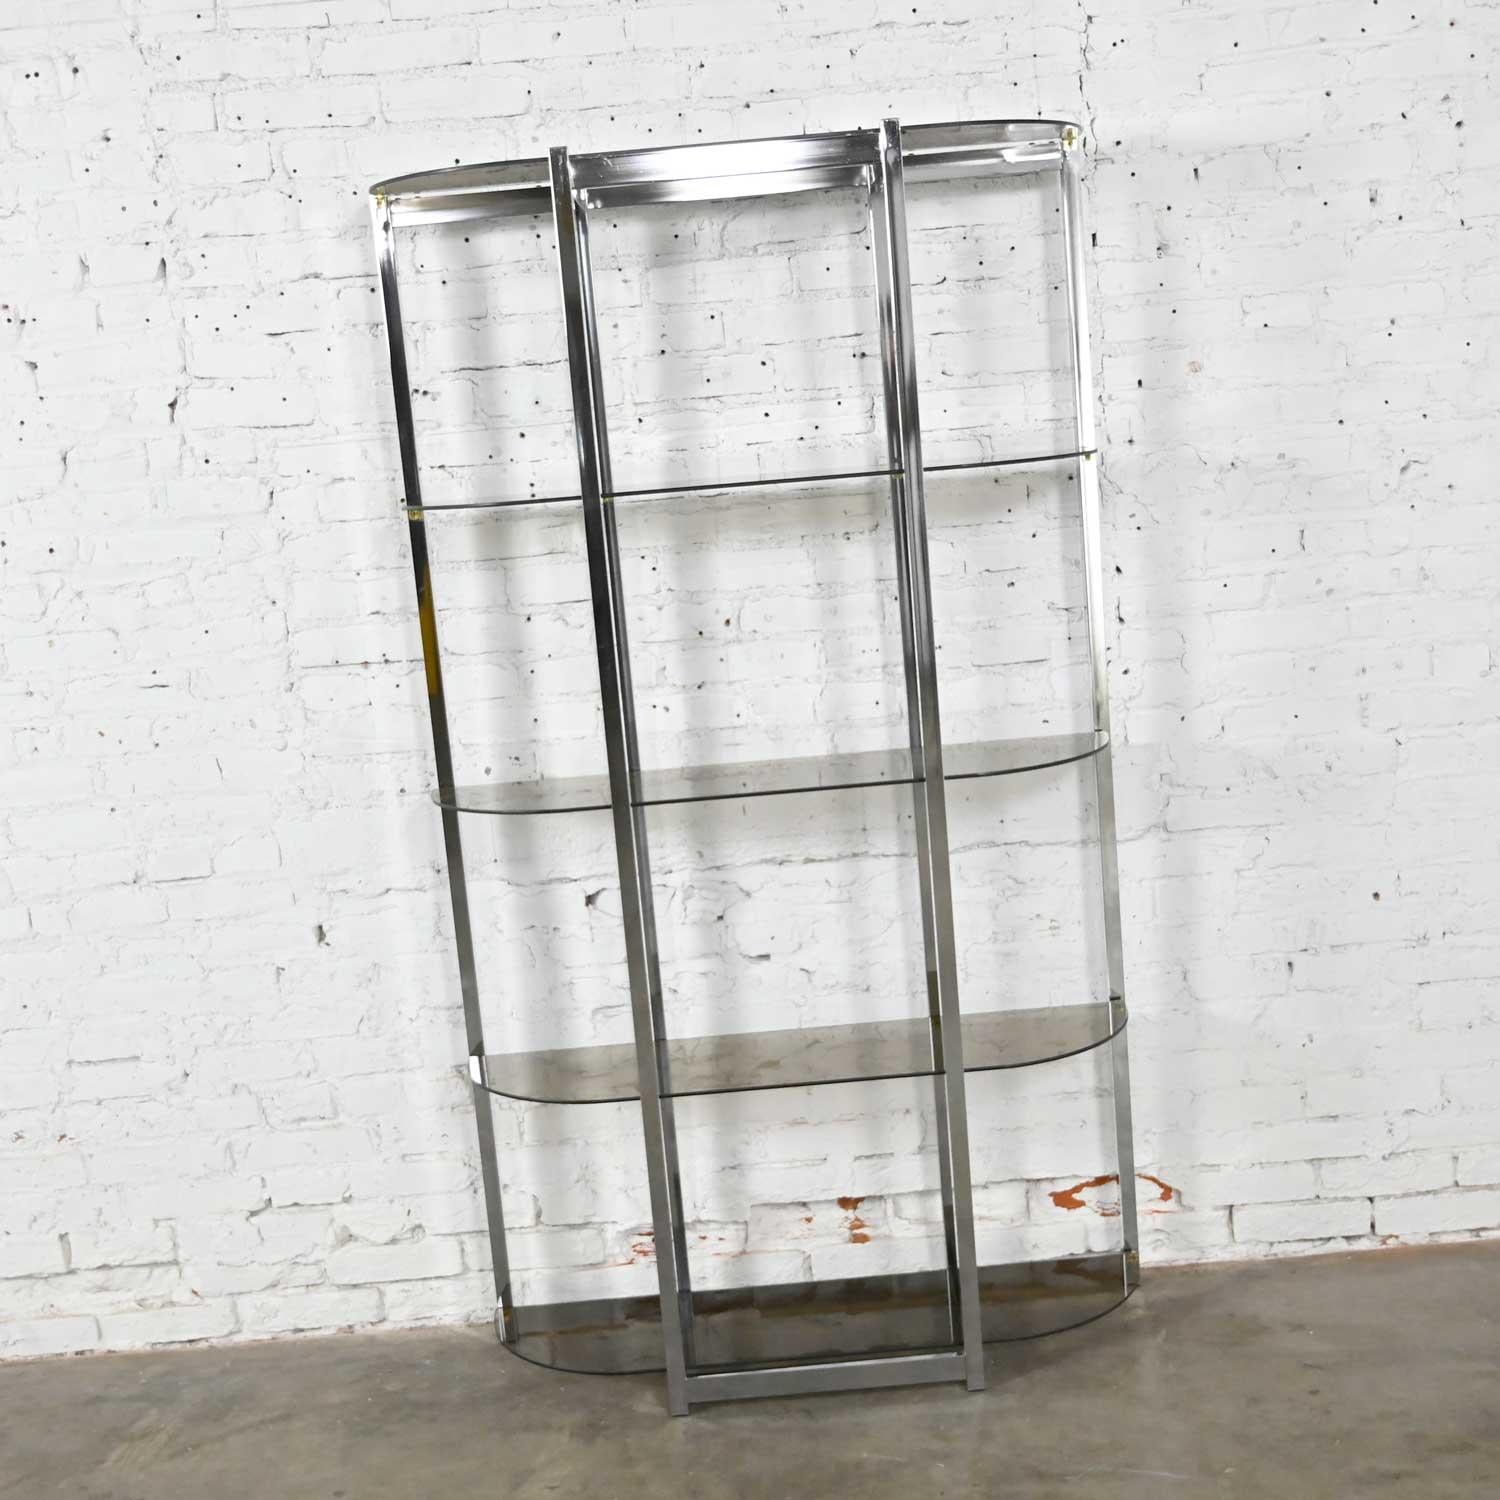 Gorgeous Mid-Century Modern étagère comprised of a bow shape chrome frame and 5 bowed smoked glass shelves. Done in the style of James David or Design Institute of America aka DIA. Beautiful condition, keeping in mind that this is vintage and not